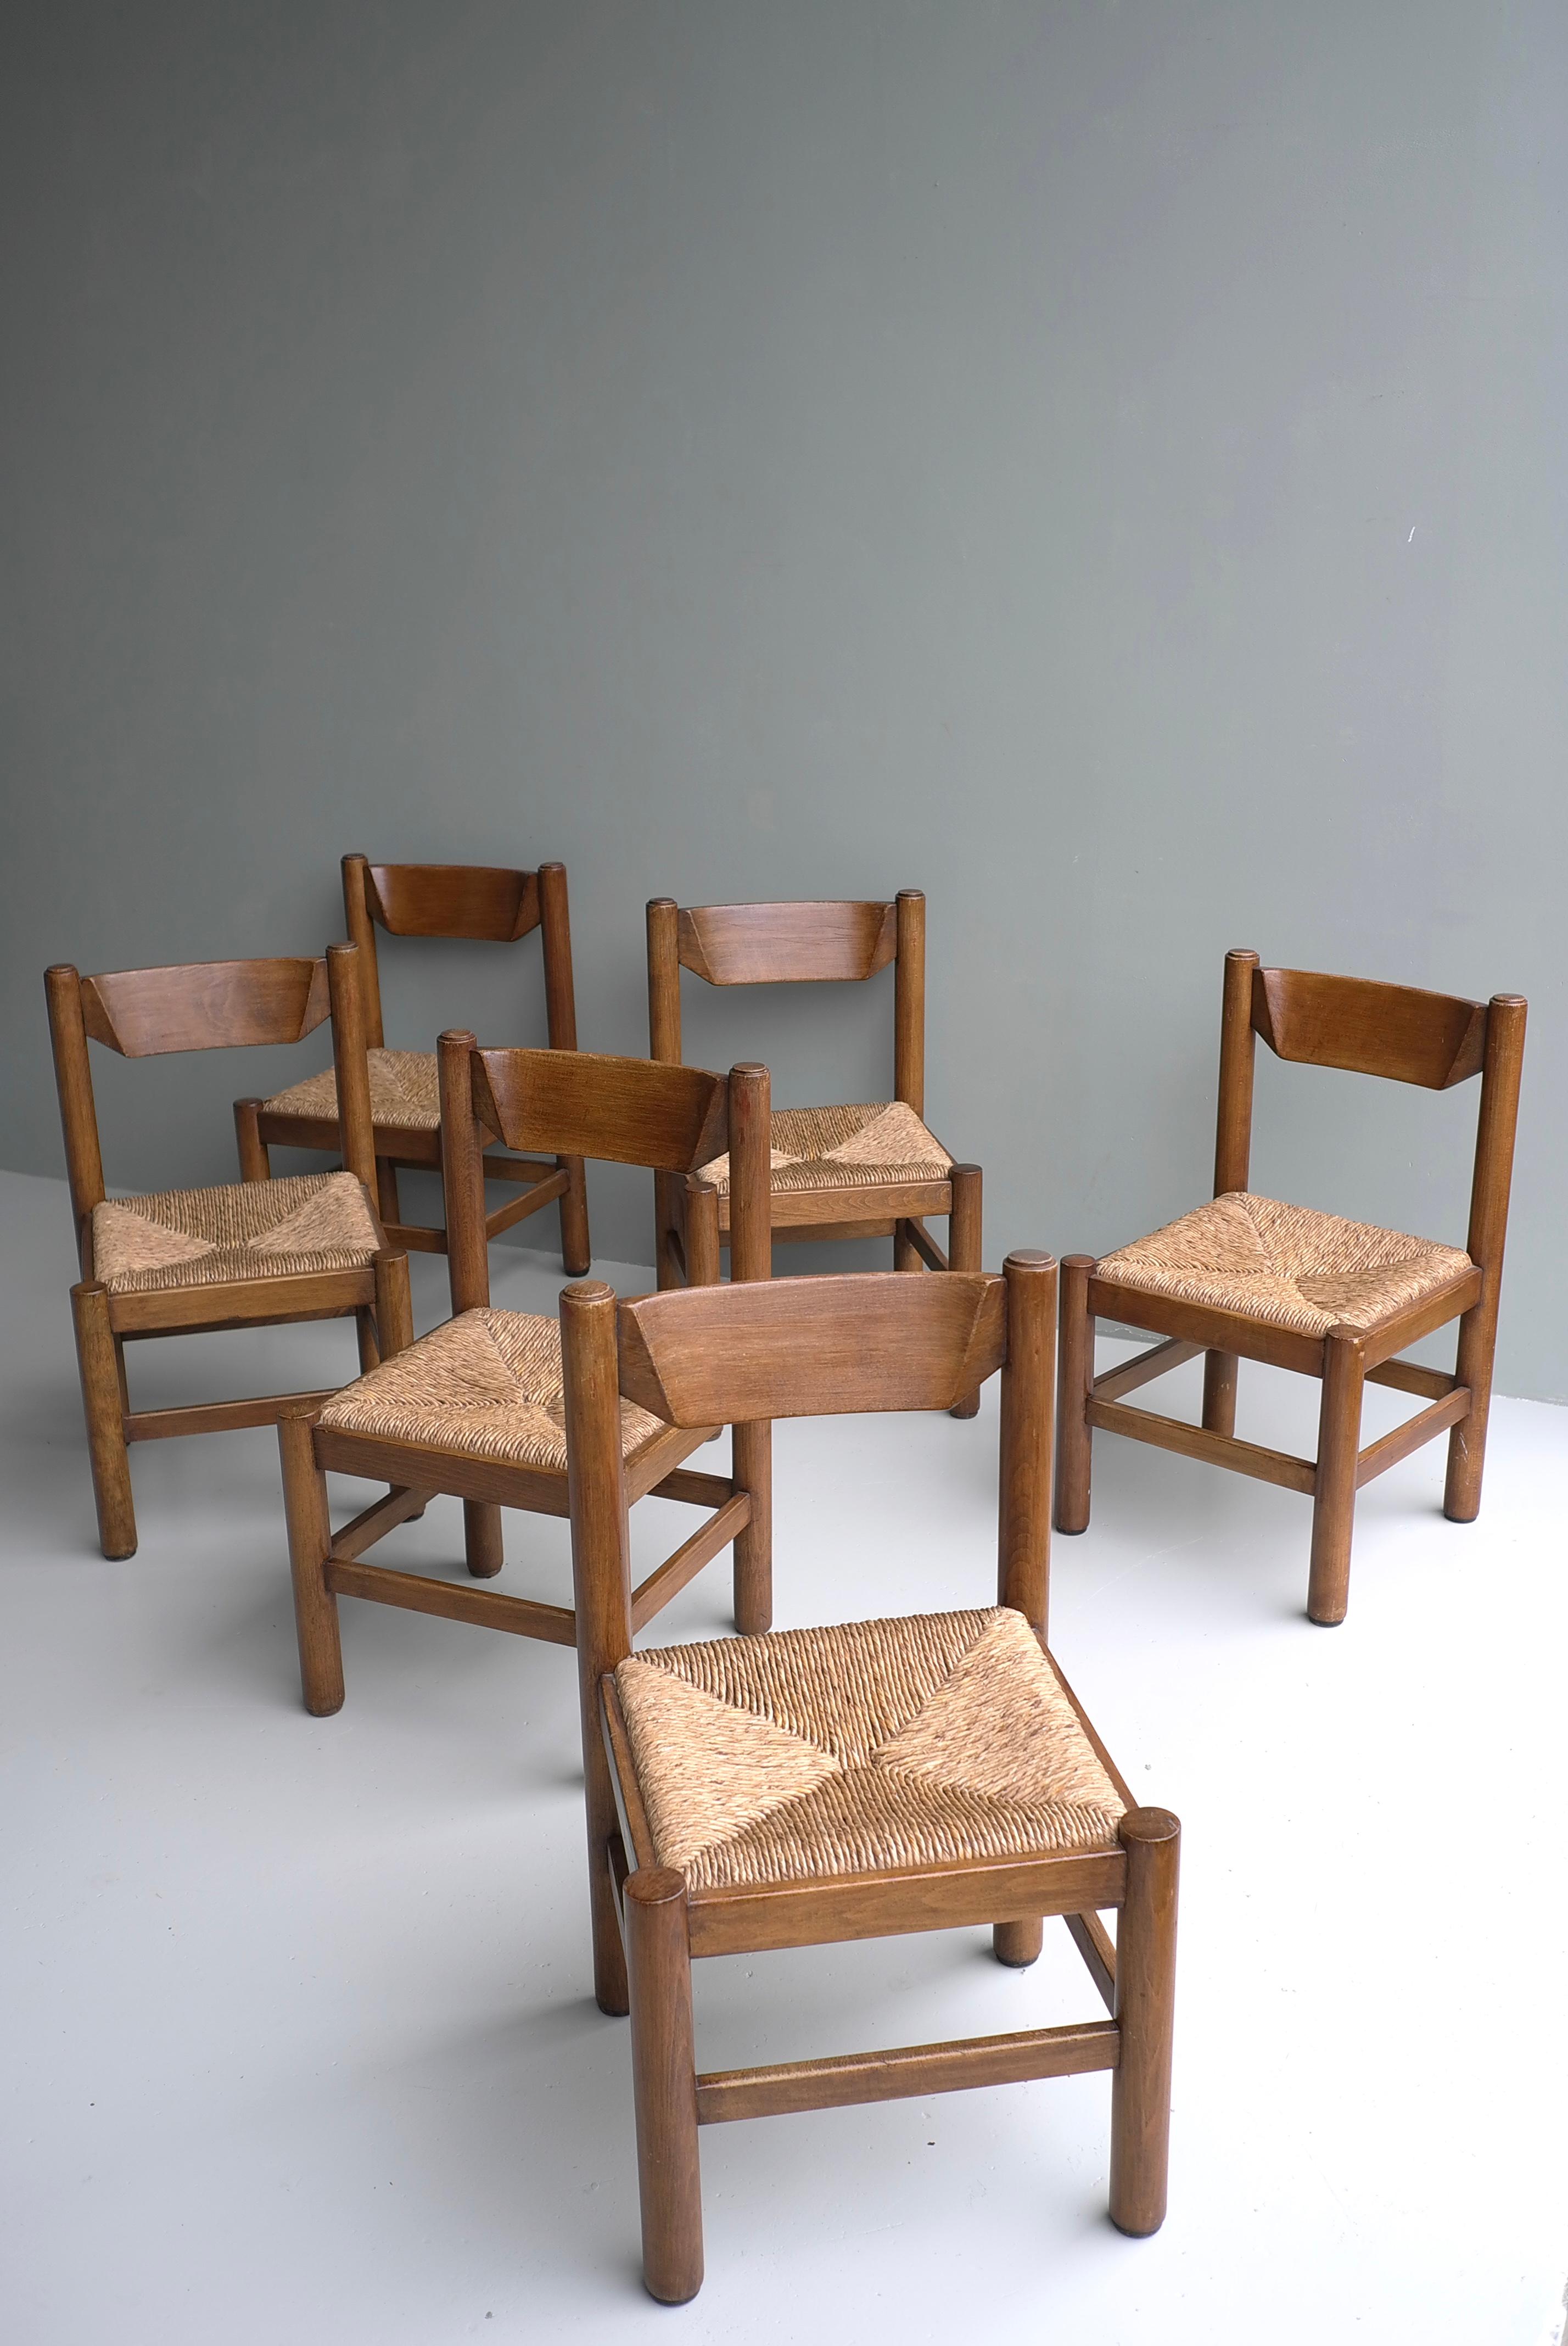 Set of six wooden dining chairs in style of Charlotte Perriand, France, 1960
Solid heavy wooden chairs with rush seats.